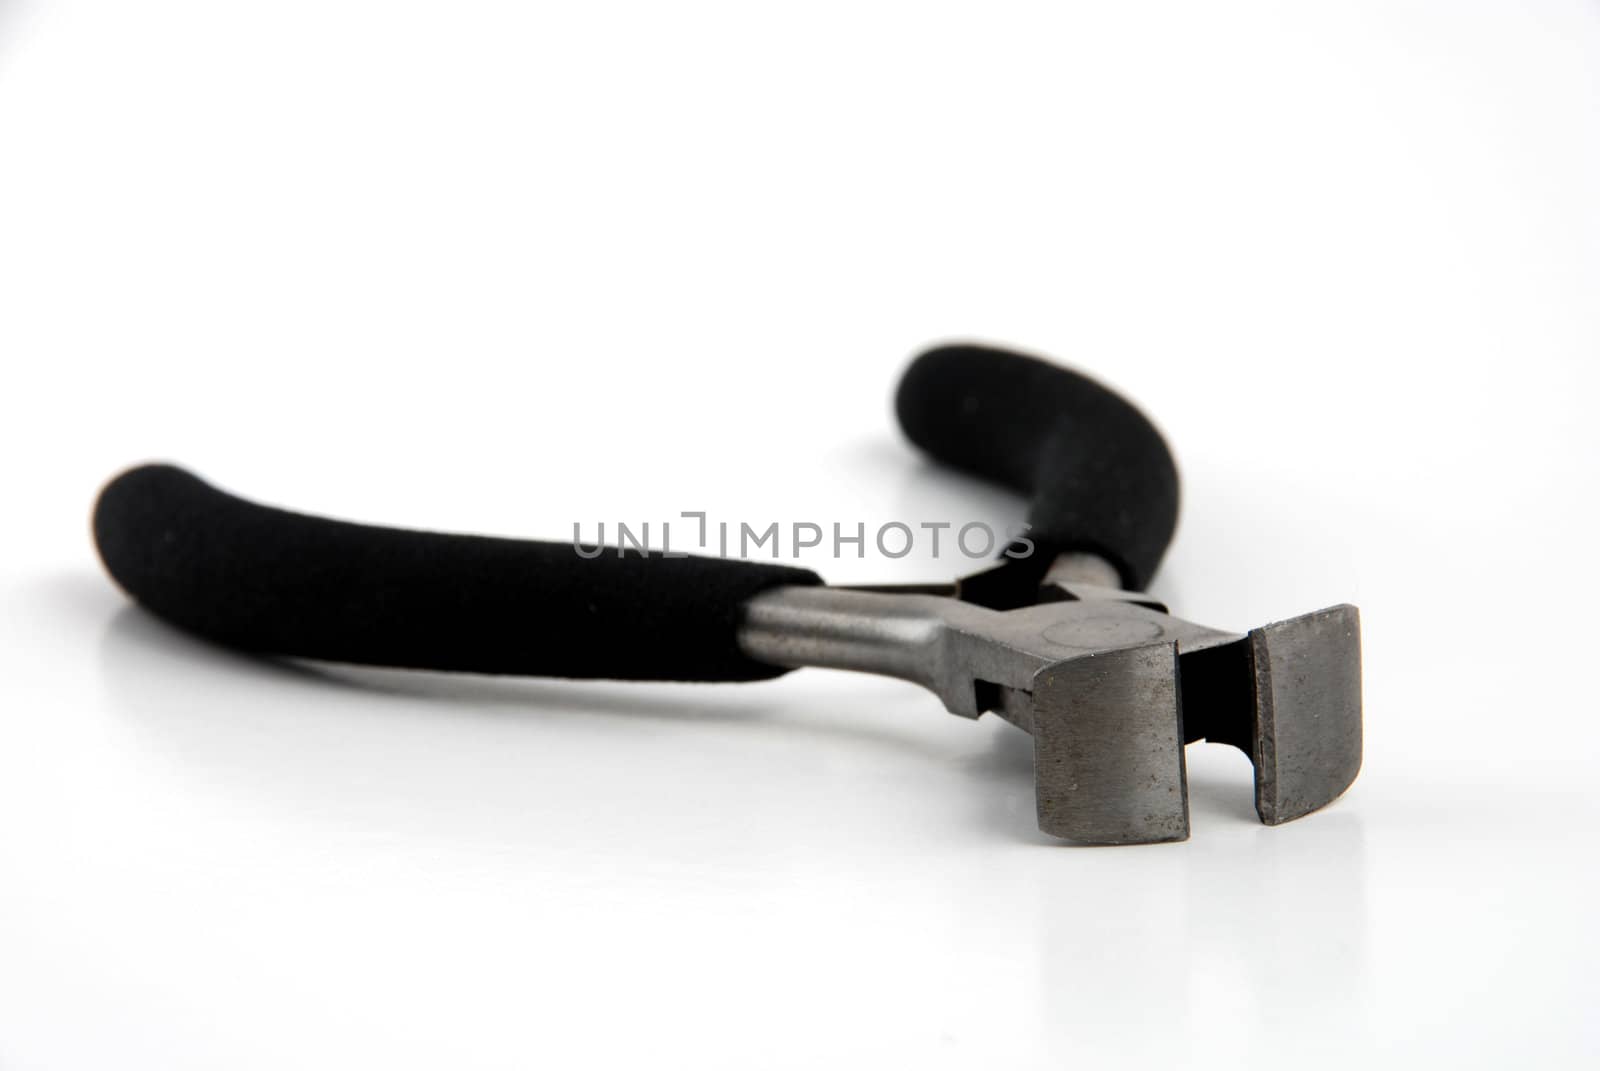 Stock pictures of tools used for home and electronics repair